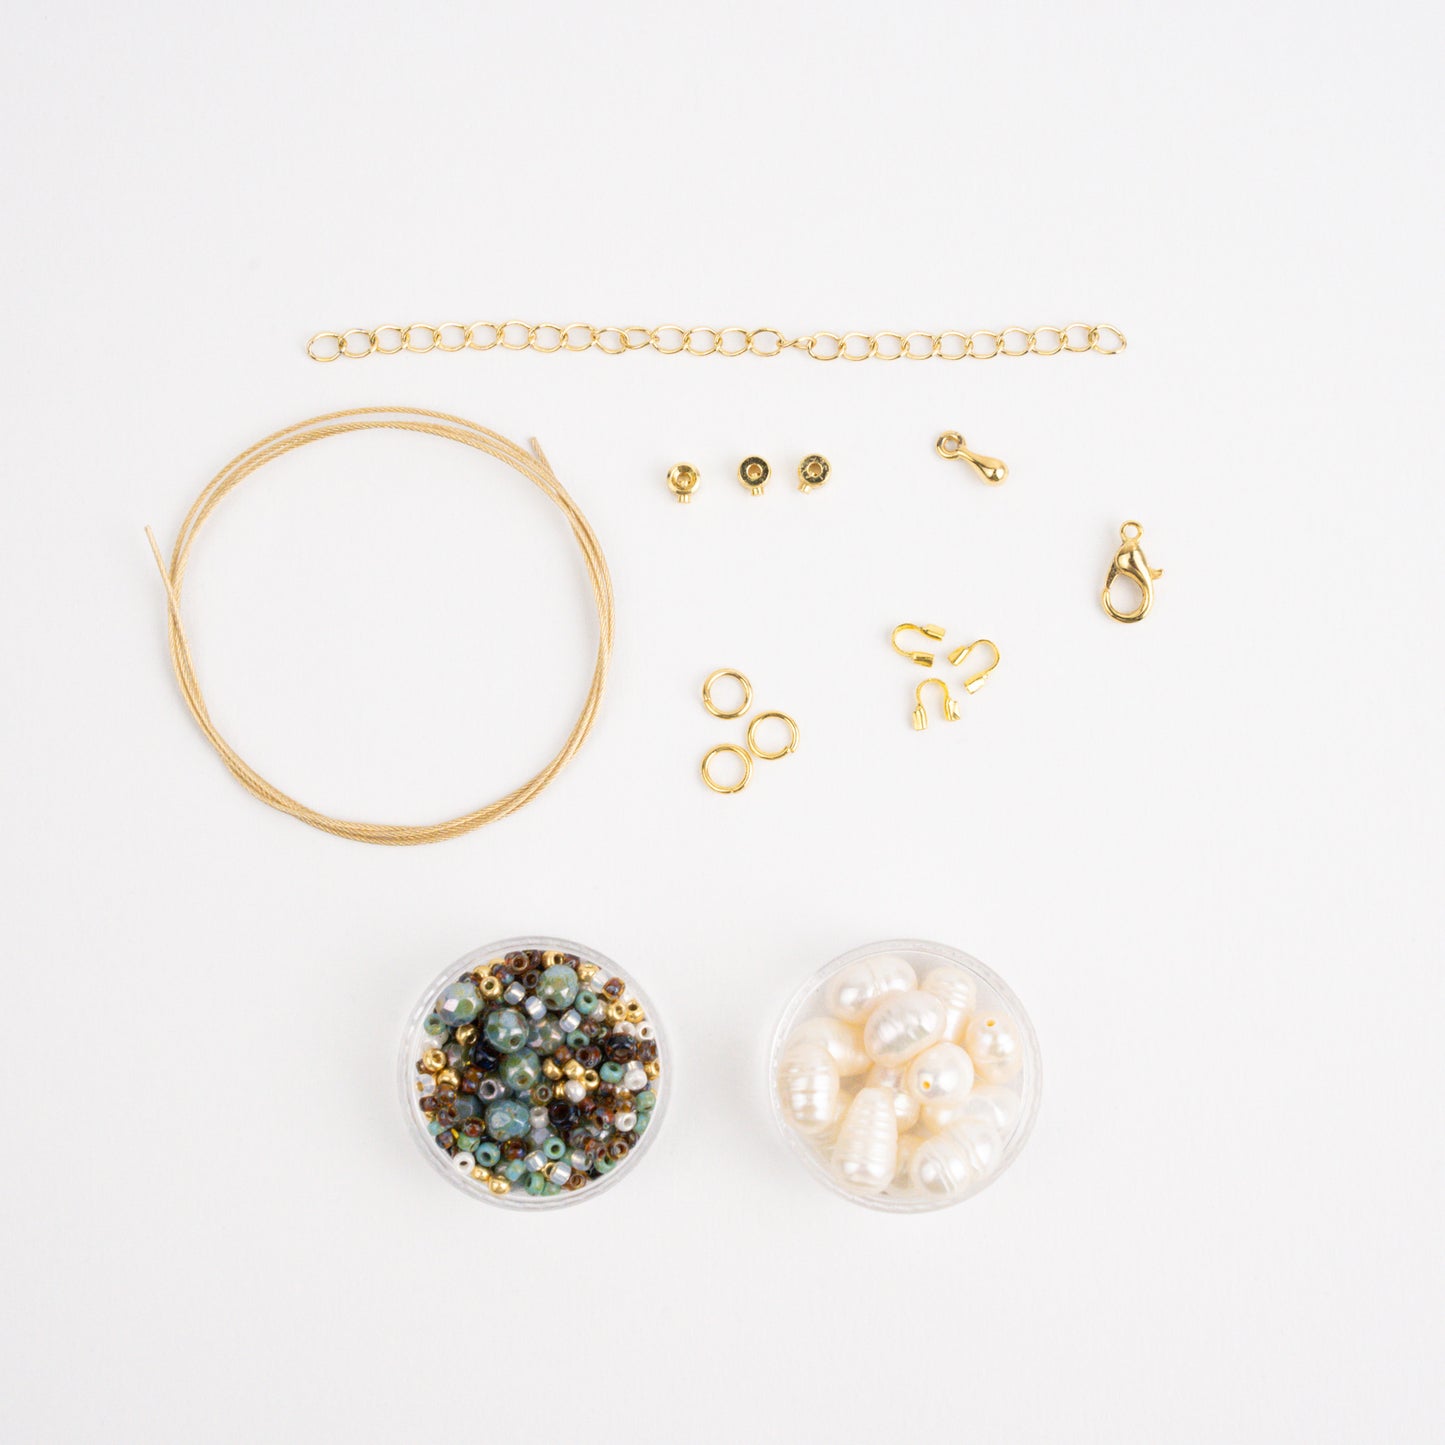 NEW | The Harper Necklace Beading Kit + Tutorial